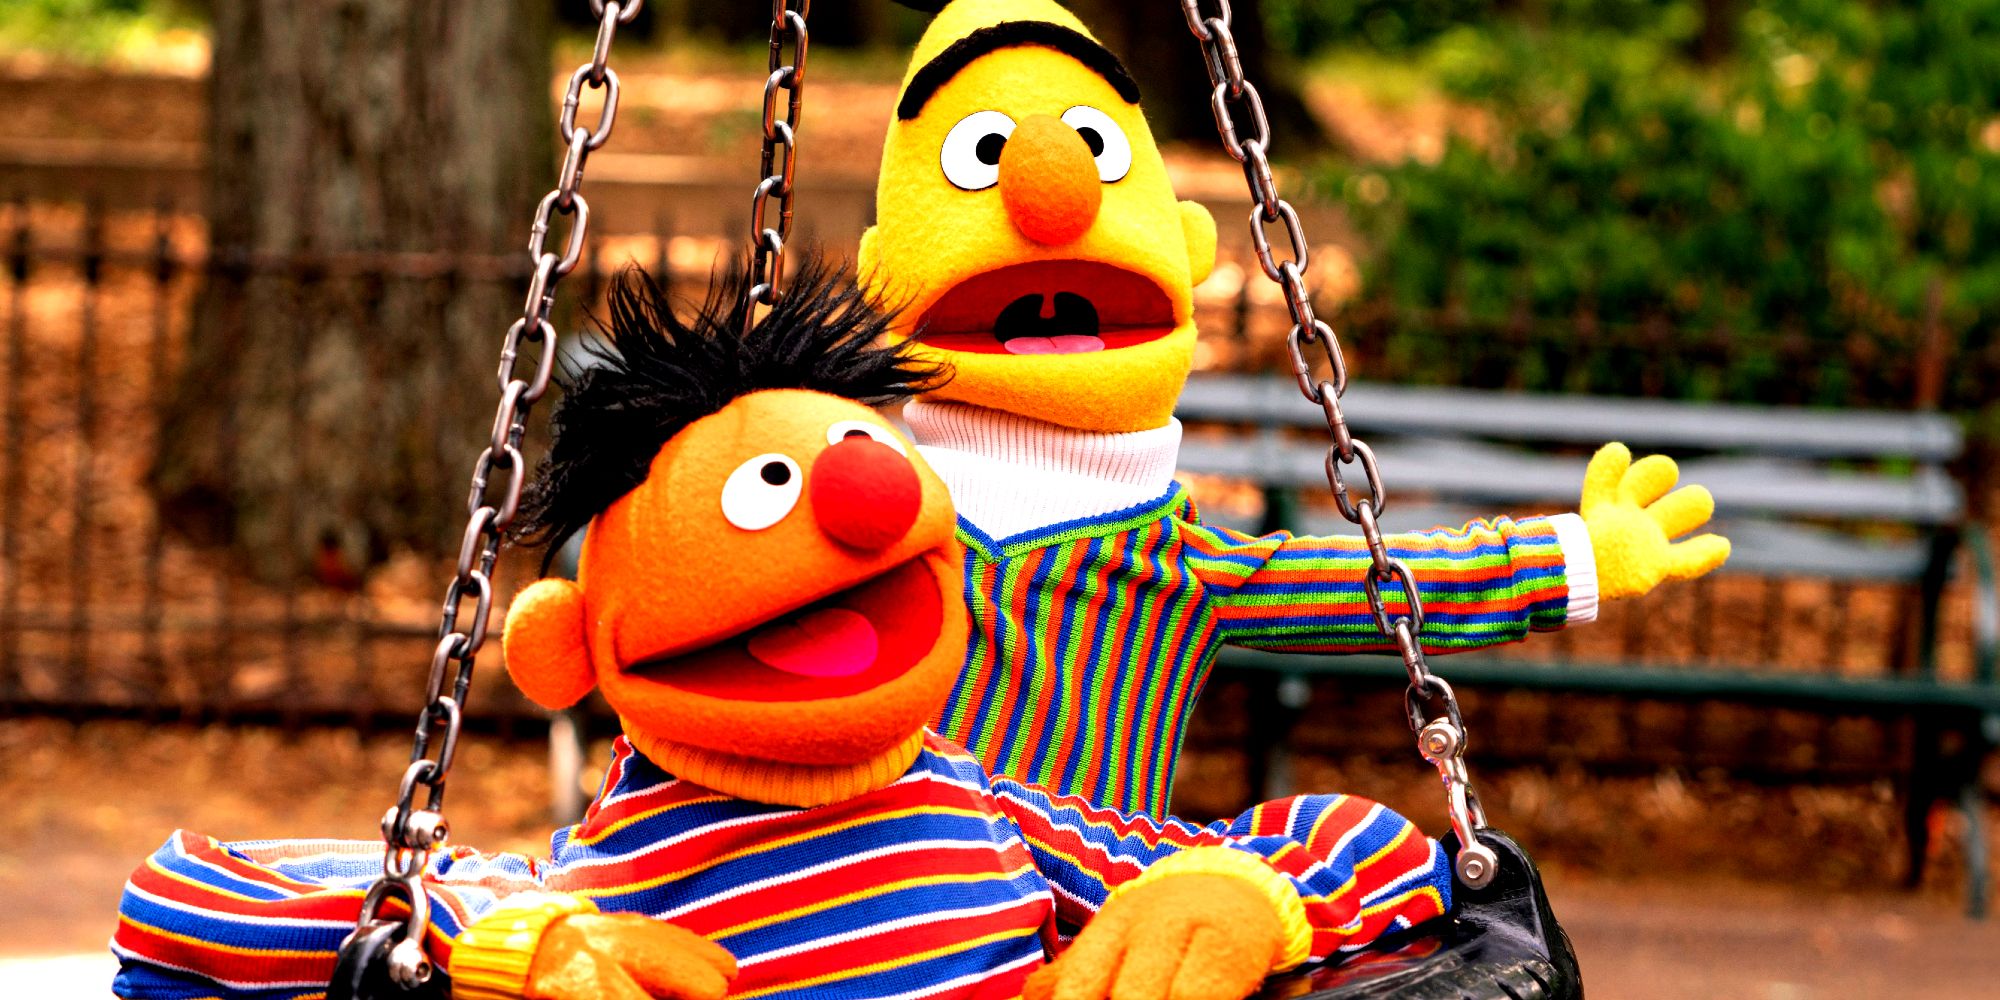 Sesame Street's Bert and Ernie riding in tire swing together